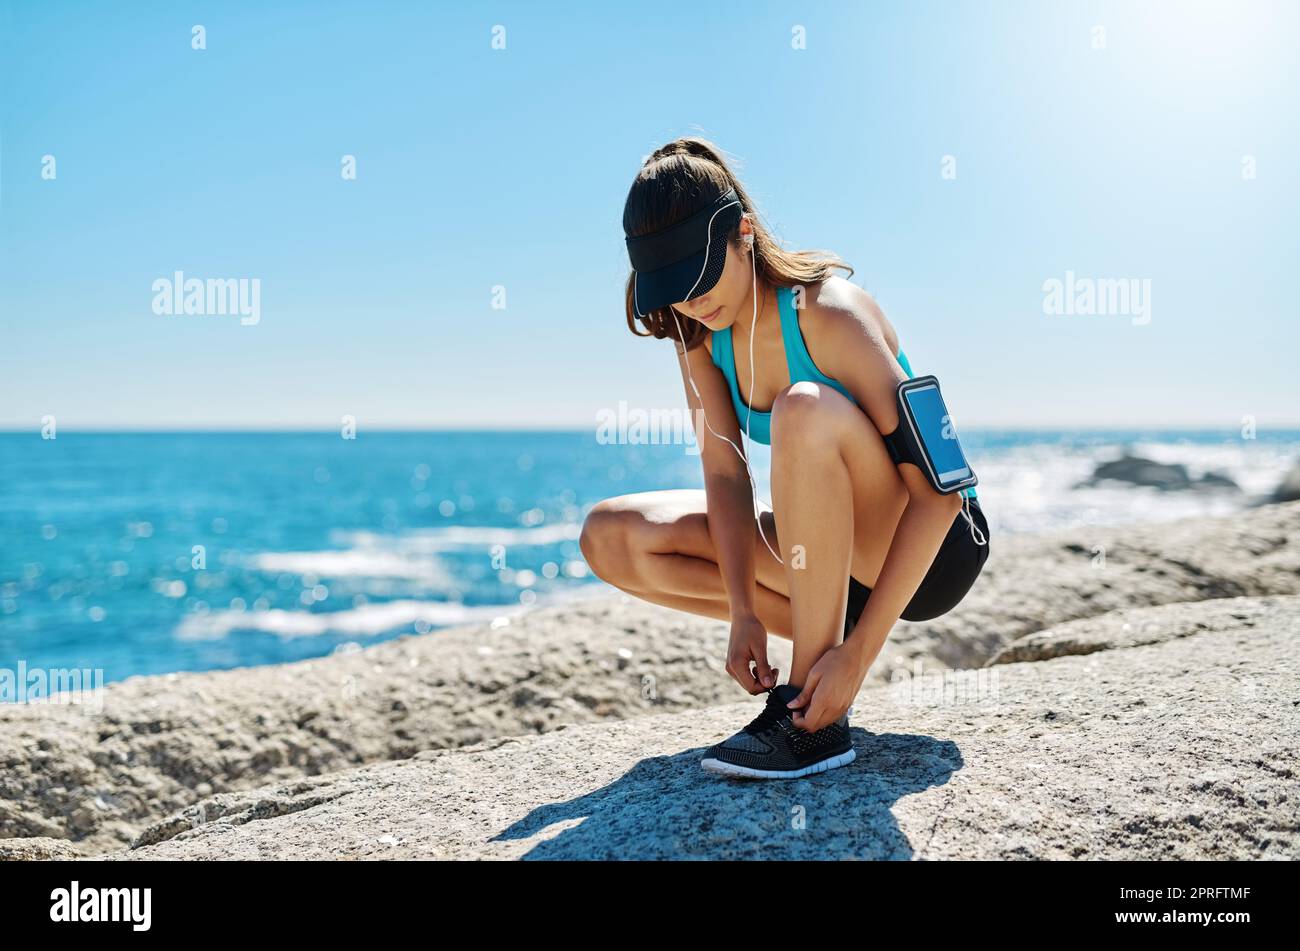 This princess wears running shoes. a sporty young woman tying her shoelaces while out for a run. Stock Photo